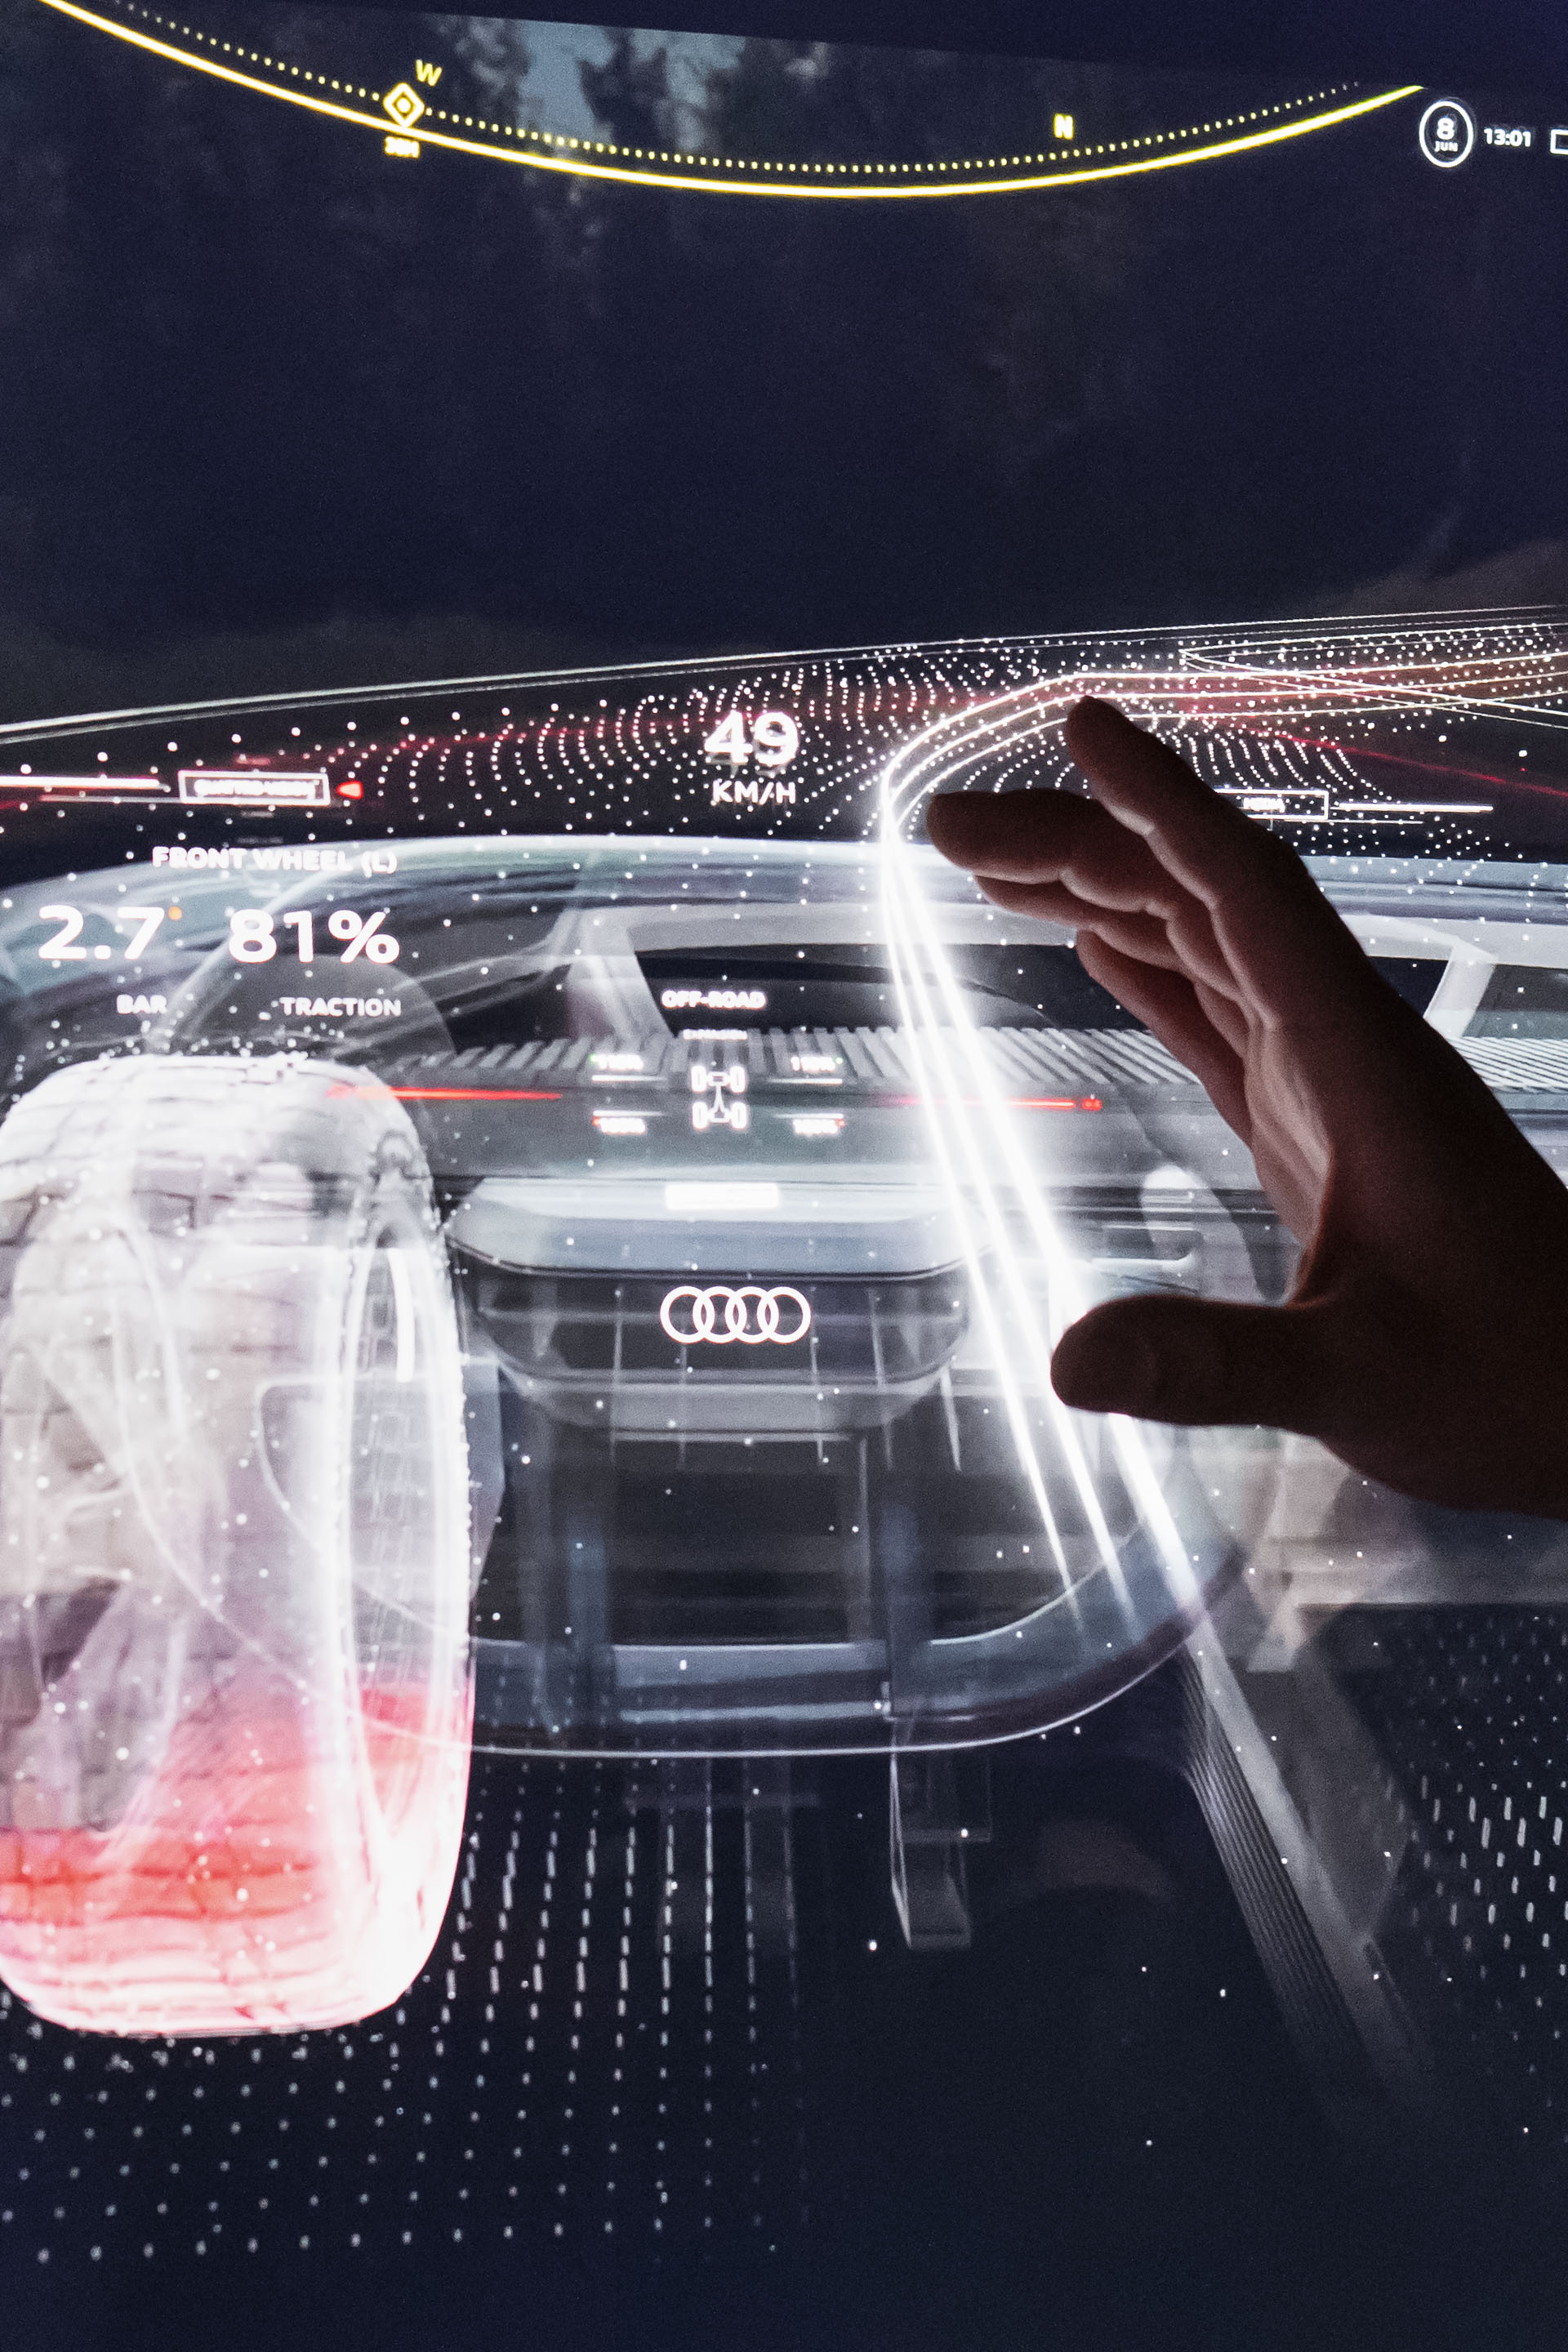 quattro visualized through the mixed reality glasses.